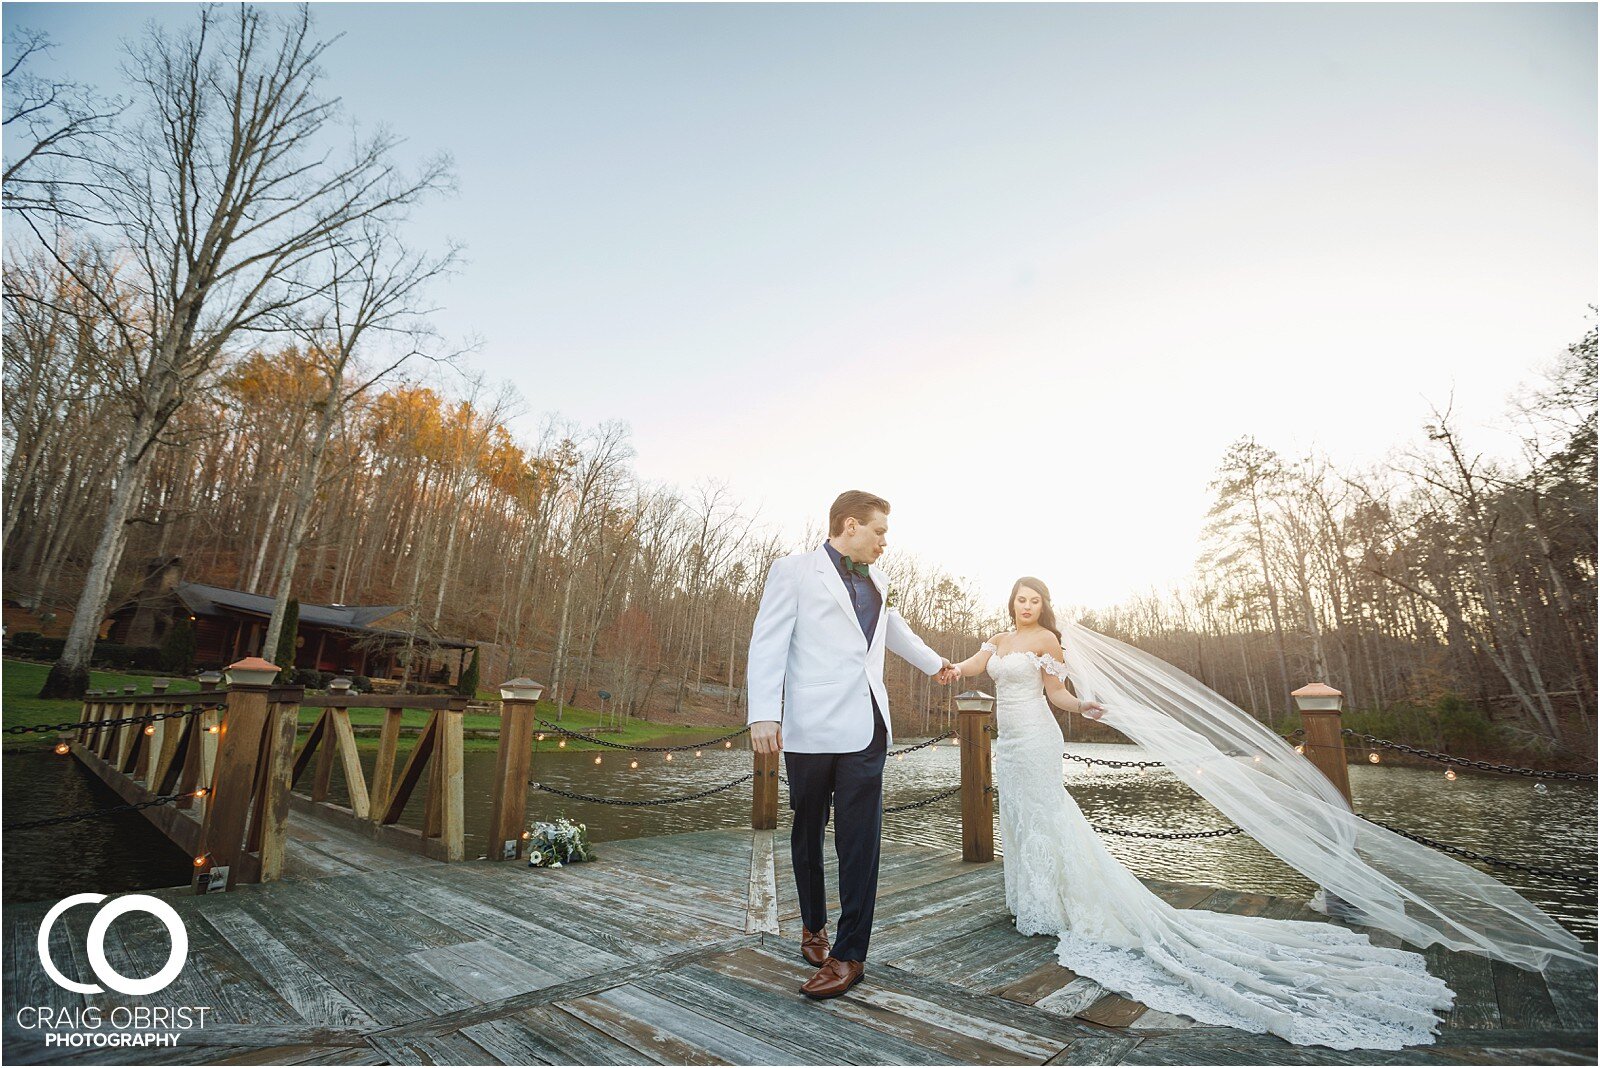 in the woods events wedding portraits sunset photographer_0097.jpg